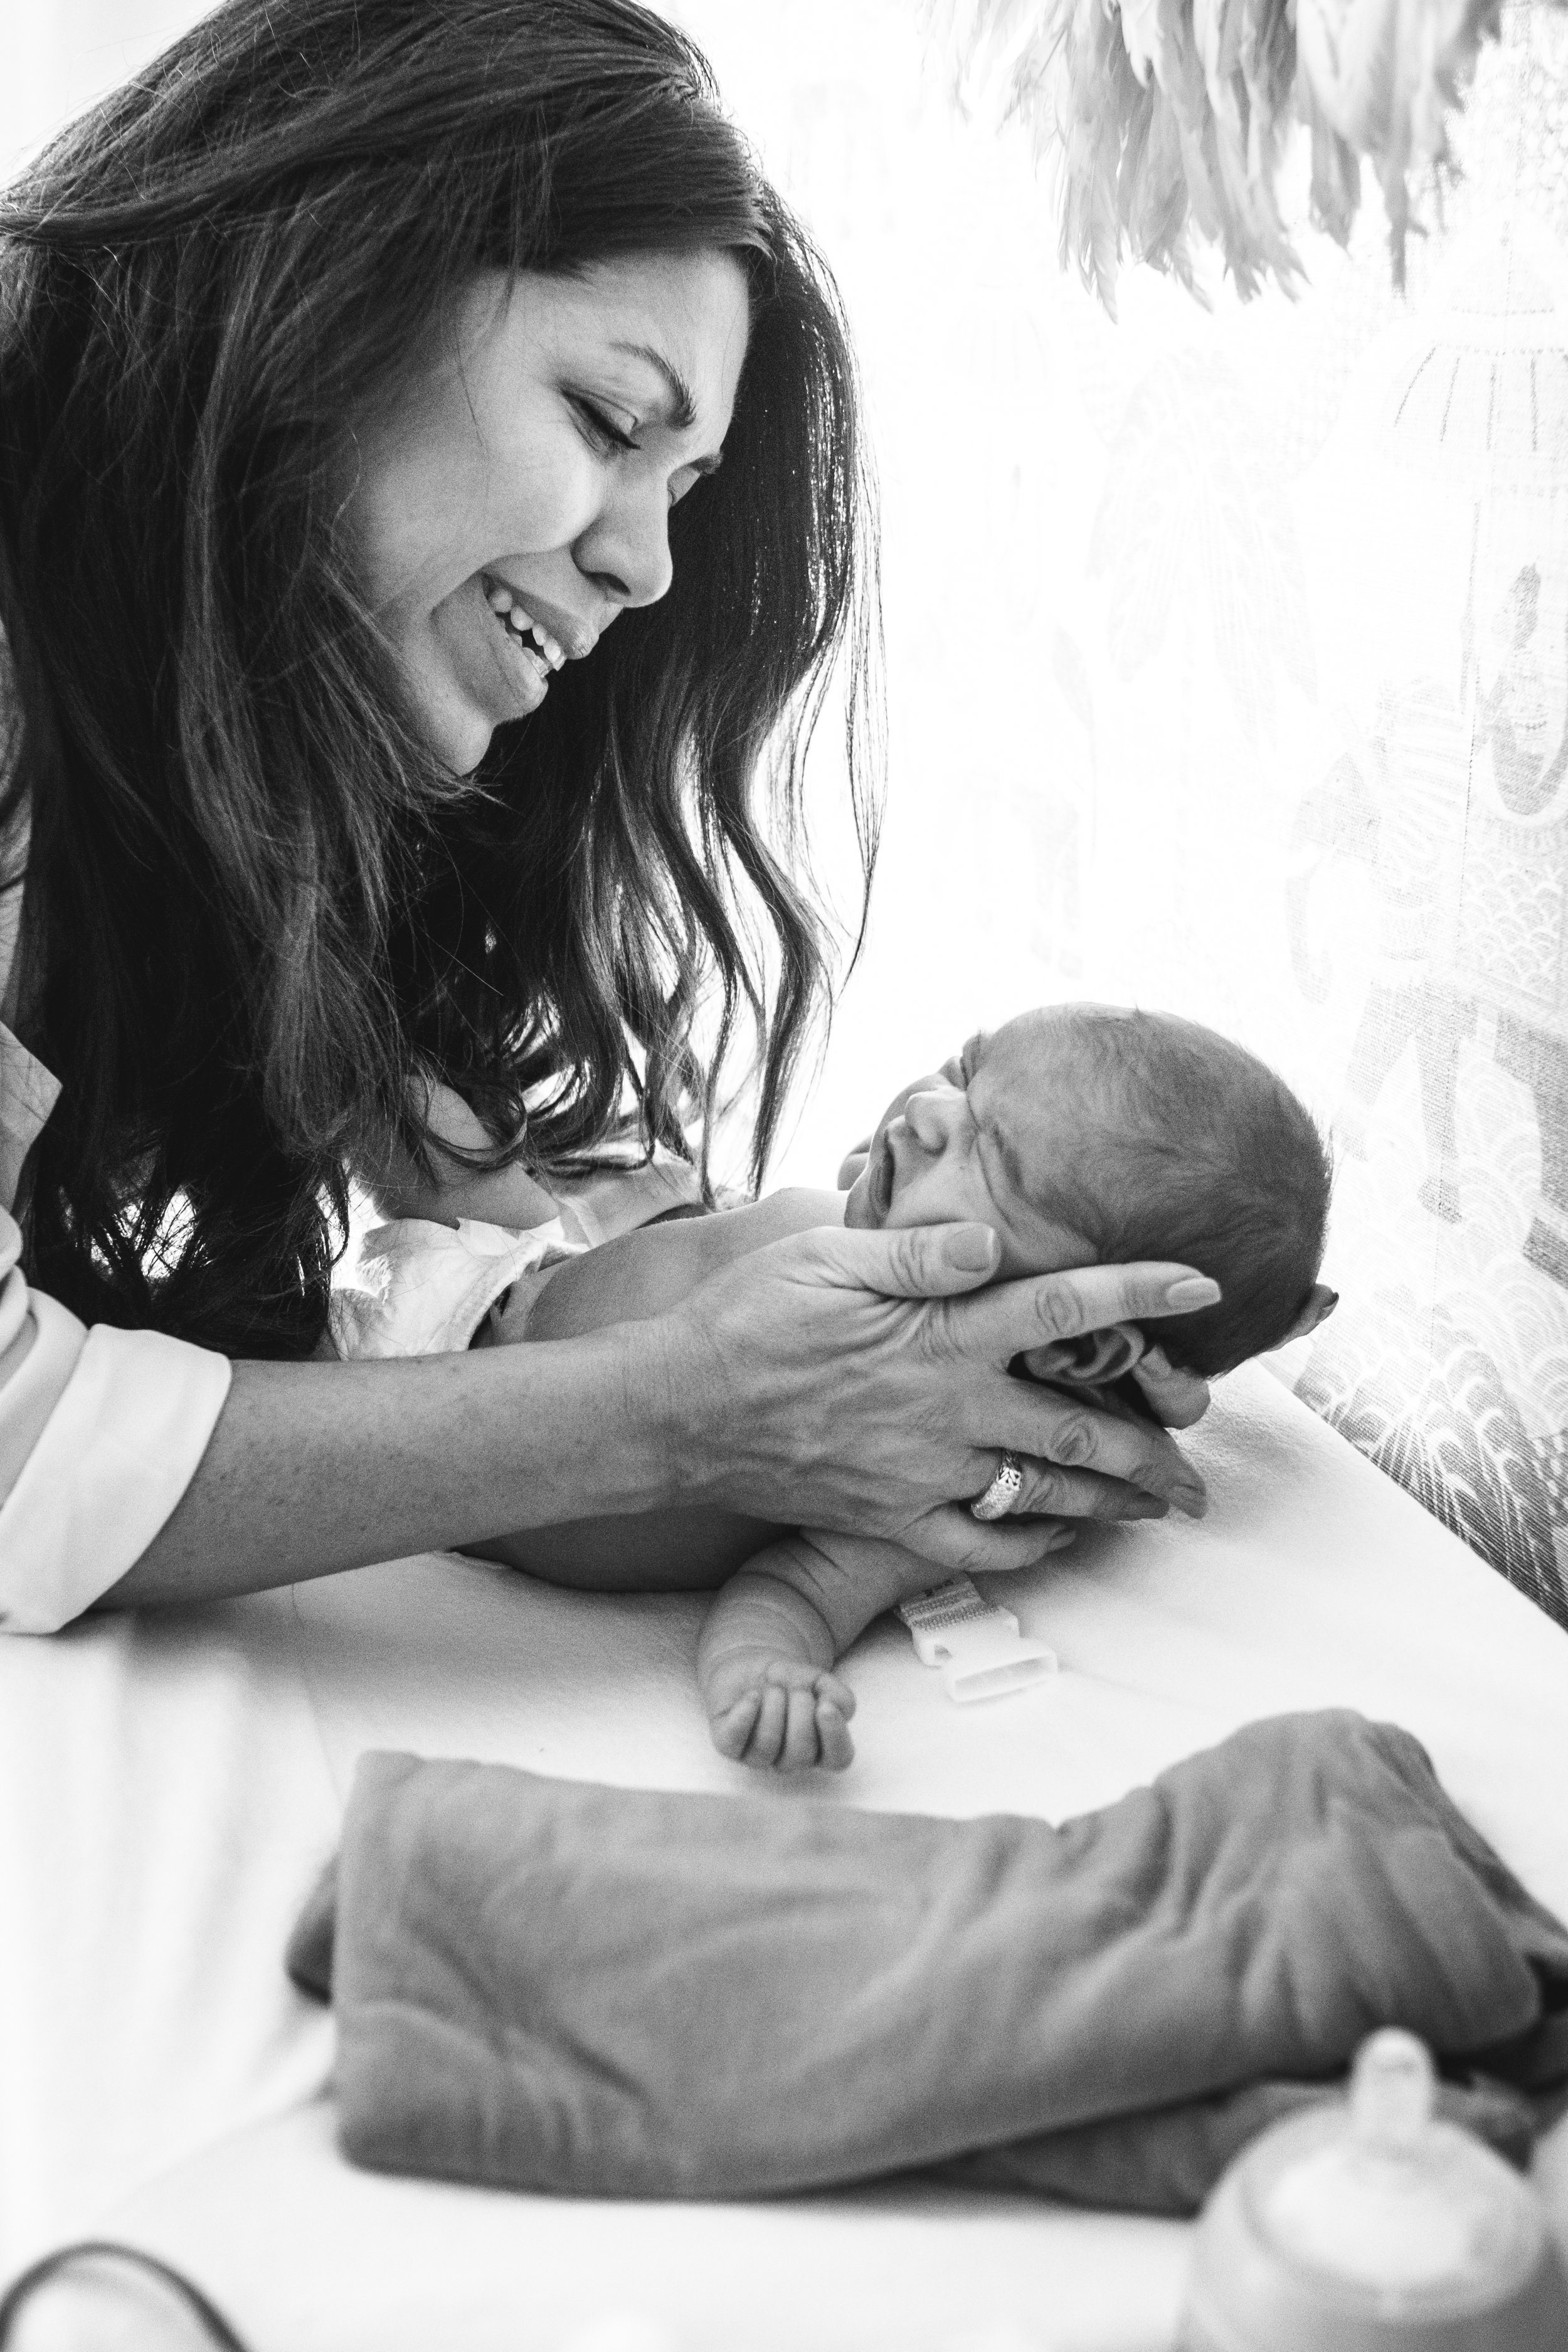 new mother tends to daughter and smiles at her while changing her diaper in black and white photograph